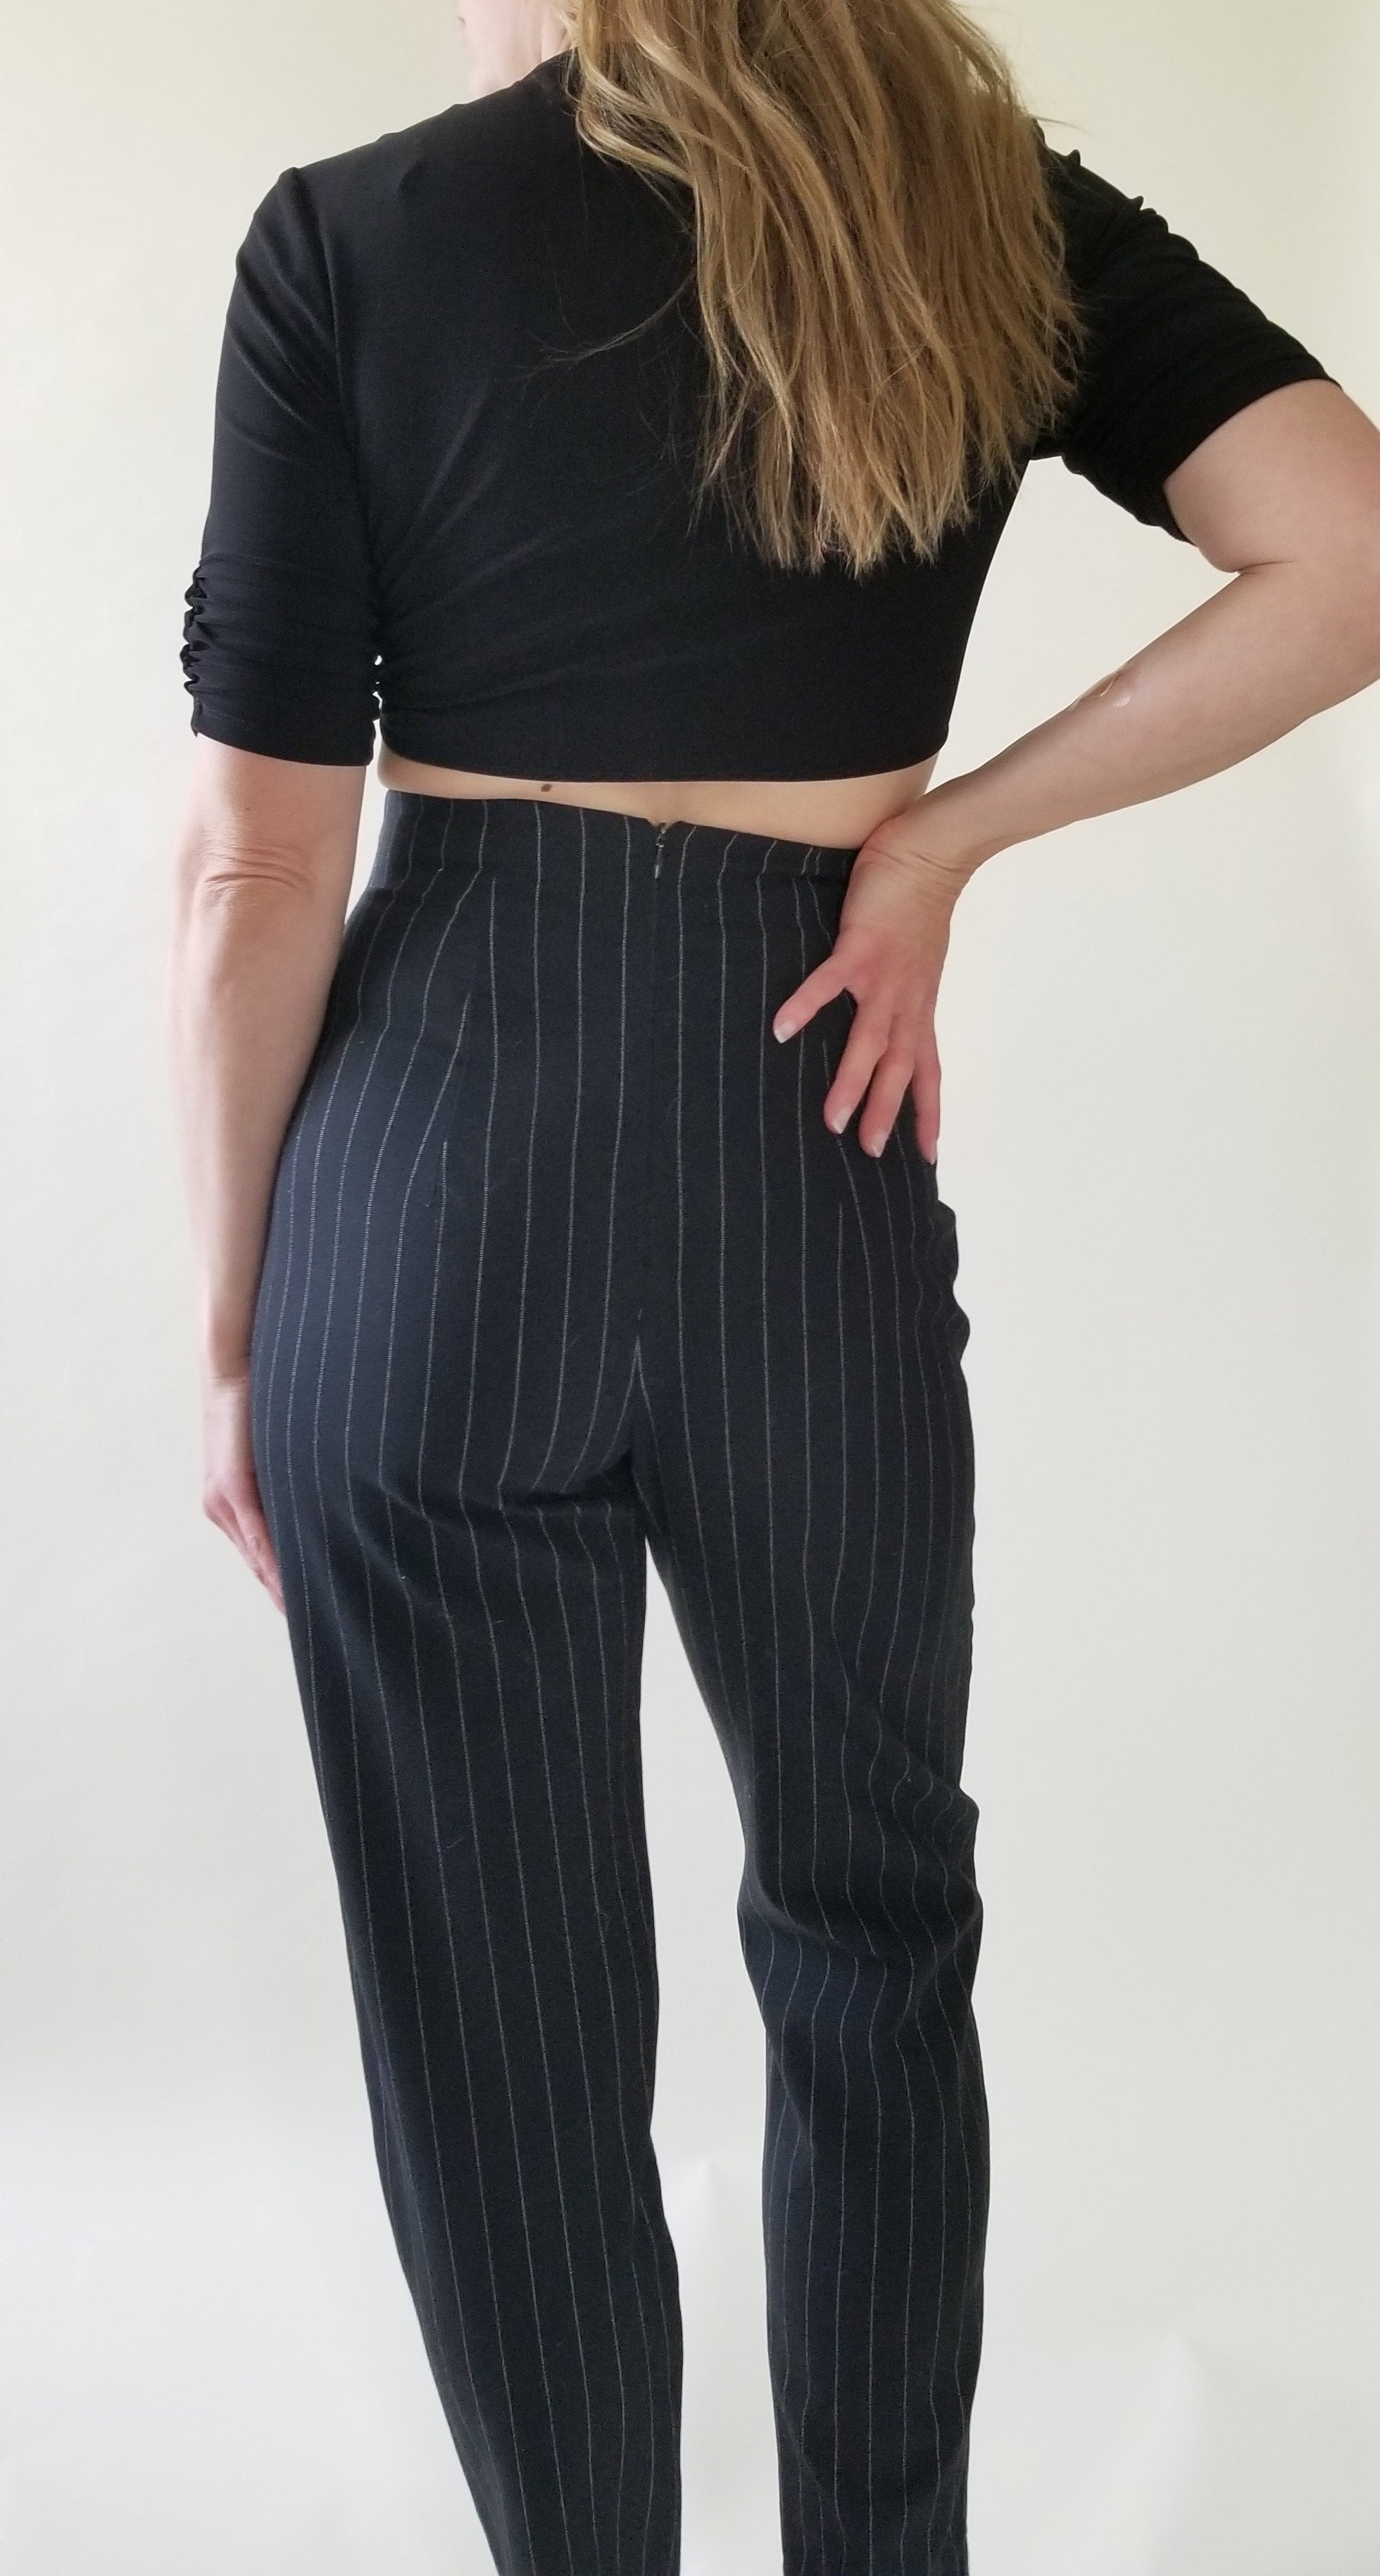 Charcoal grey pinstripe high waisted pleated stretch Women Trousers